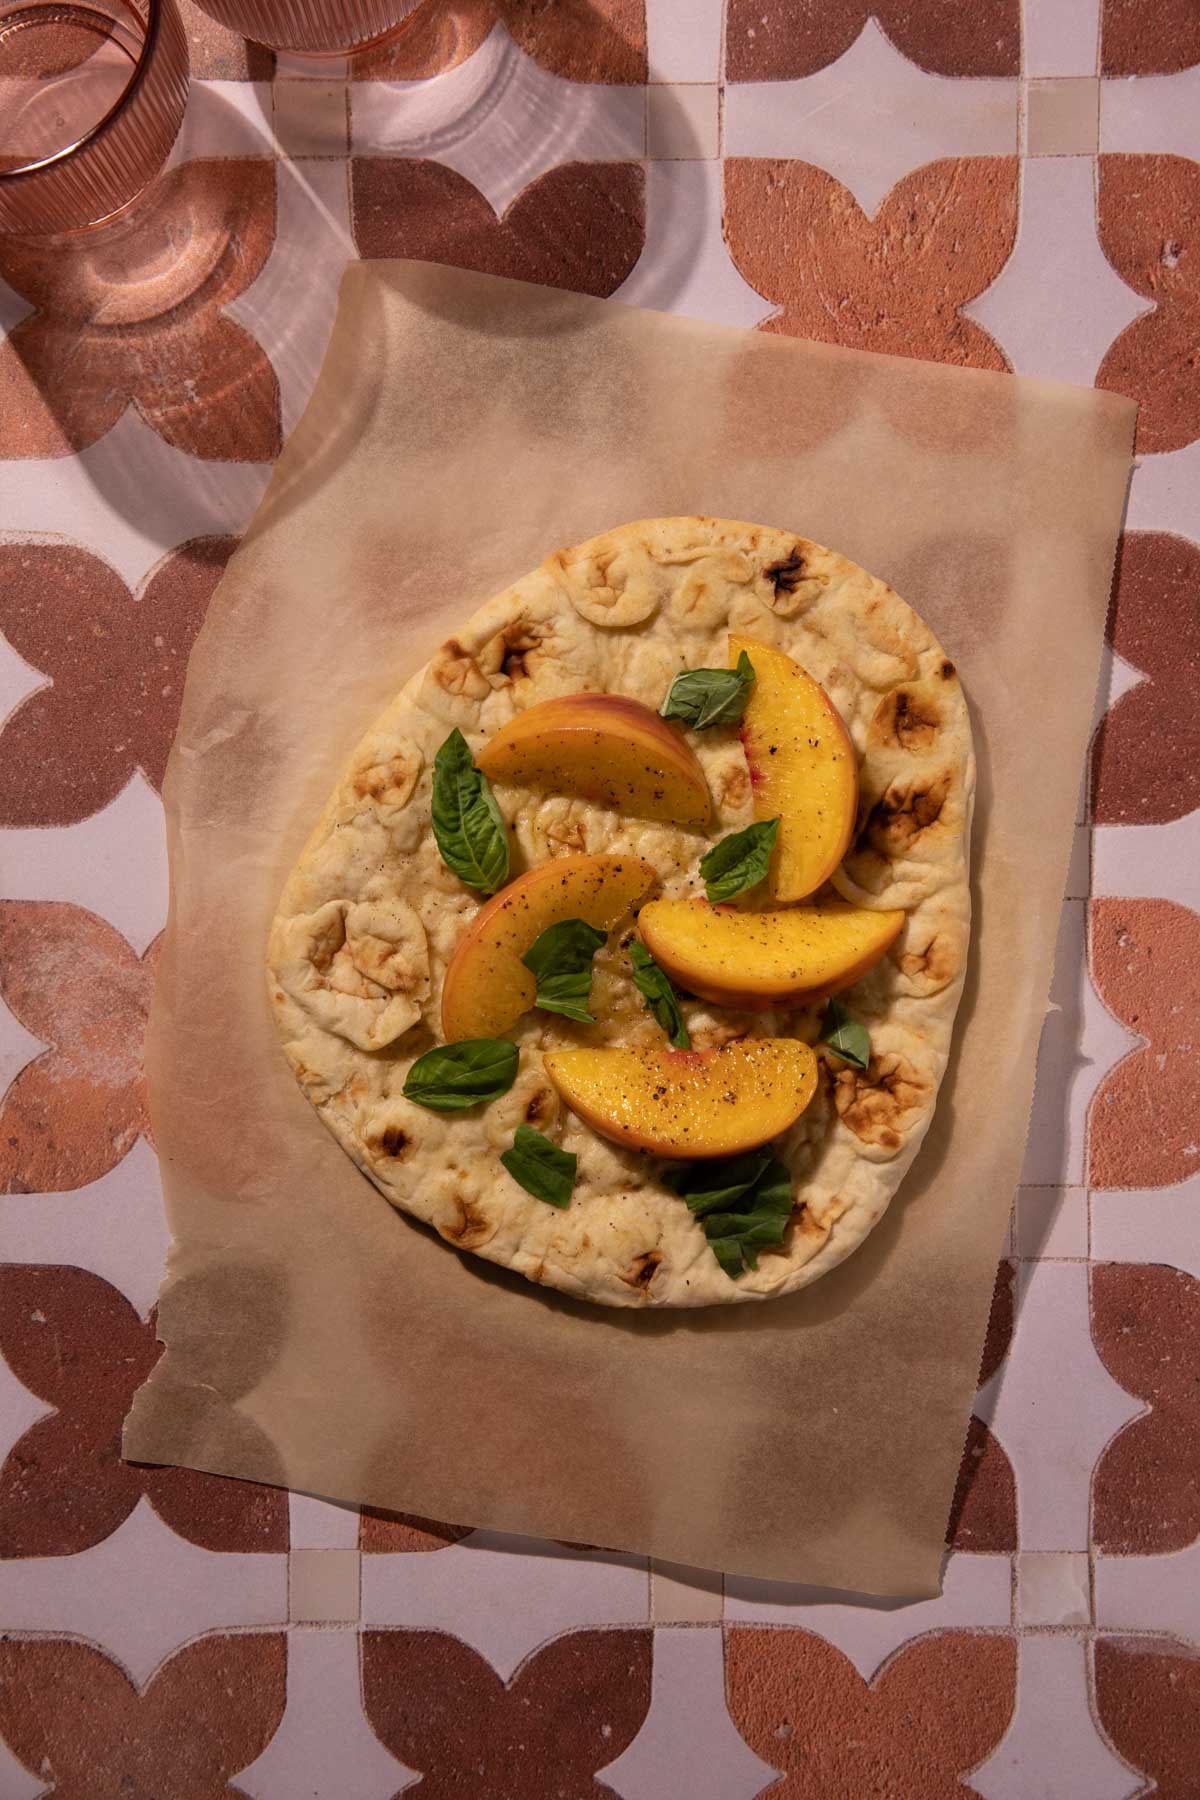 Peaches and fresh basil on naan bread